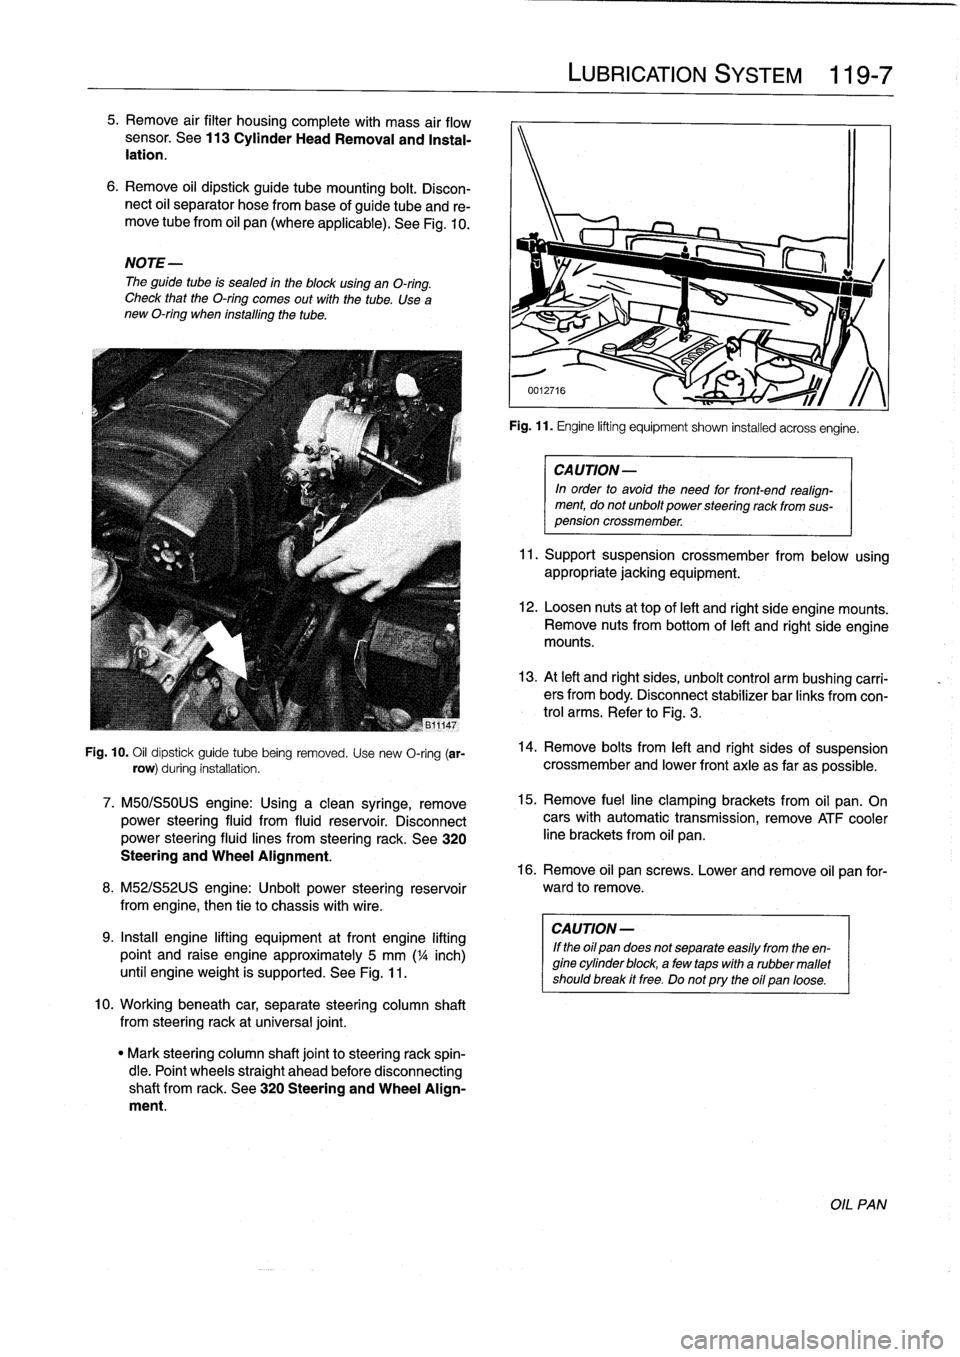 BMW 328i 1995 E36 Workshop Manual 
5
.
Remove
air
filter
housingcomplete
with
mass
air
flow
sensor
.
See113
Cylinder
HeadRemoval
and
Instal-
lation
.

6
.
Remove
oil
dipstick
guide
tube
mounting
bolt
.
Discon-
nect
oil
separator
hose
